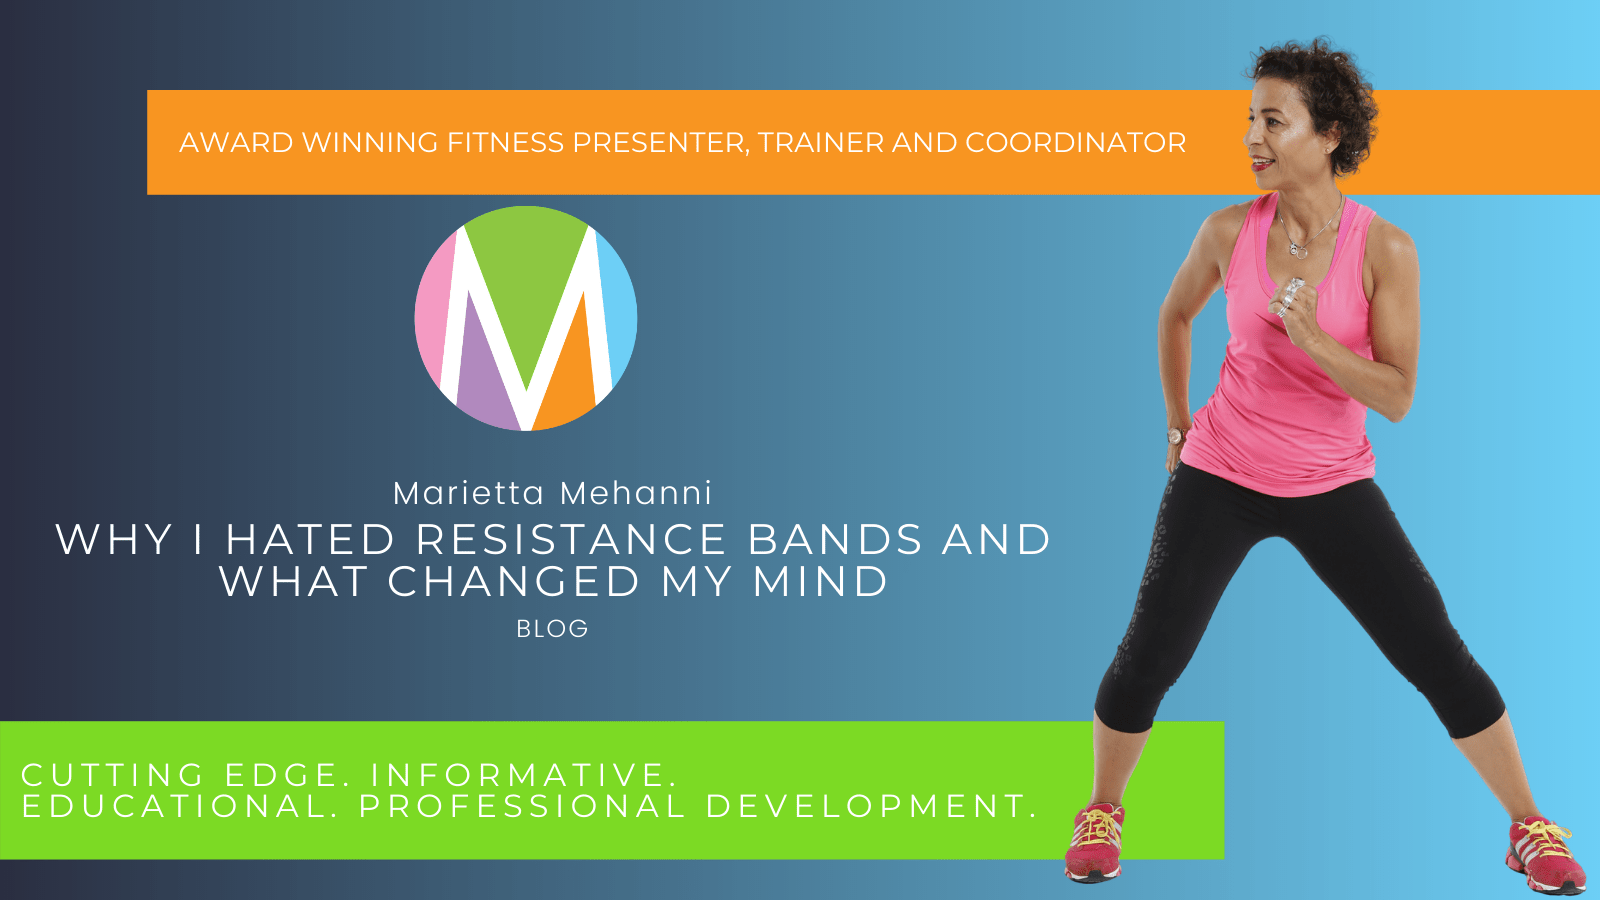 Marietta Mehanni blog why I hated resistance bands and what changed my mind marietta mehanni education professional development group fitness personal training informative fitness guru presenter